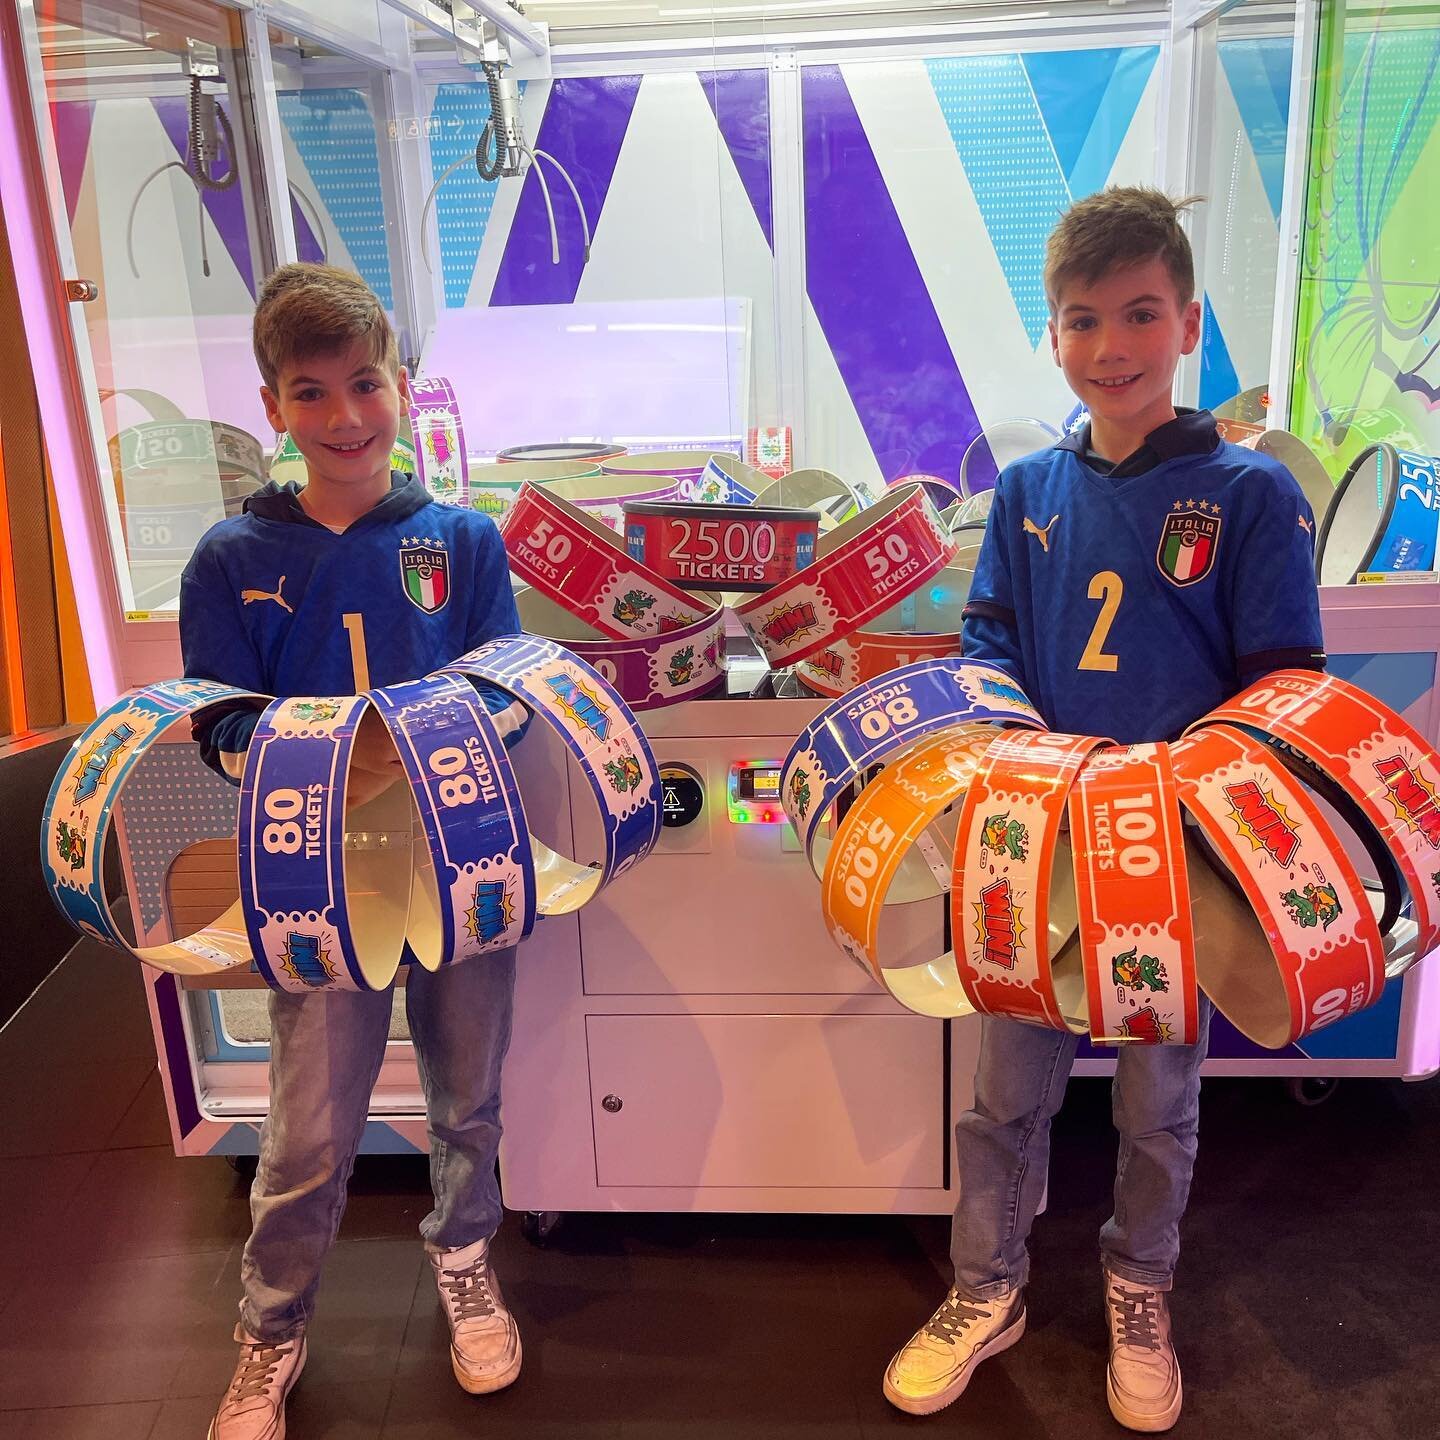 BIG WIN FOR THESE GUYS AT TOTALLY GAME AND FOR ITALY 🕹🇮🇹 

Test your skills at our newest game &lsquo;GIANT CLAW&rsquo;
.
.
.
.
#arcade #games #bigwin #totallygame #italy #eurofinal